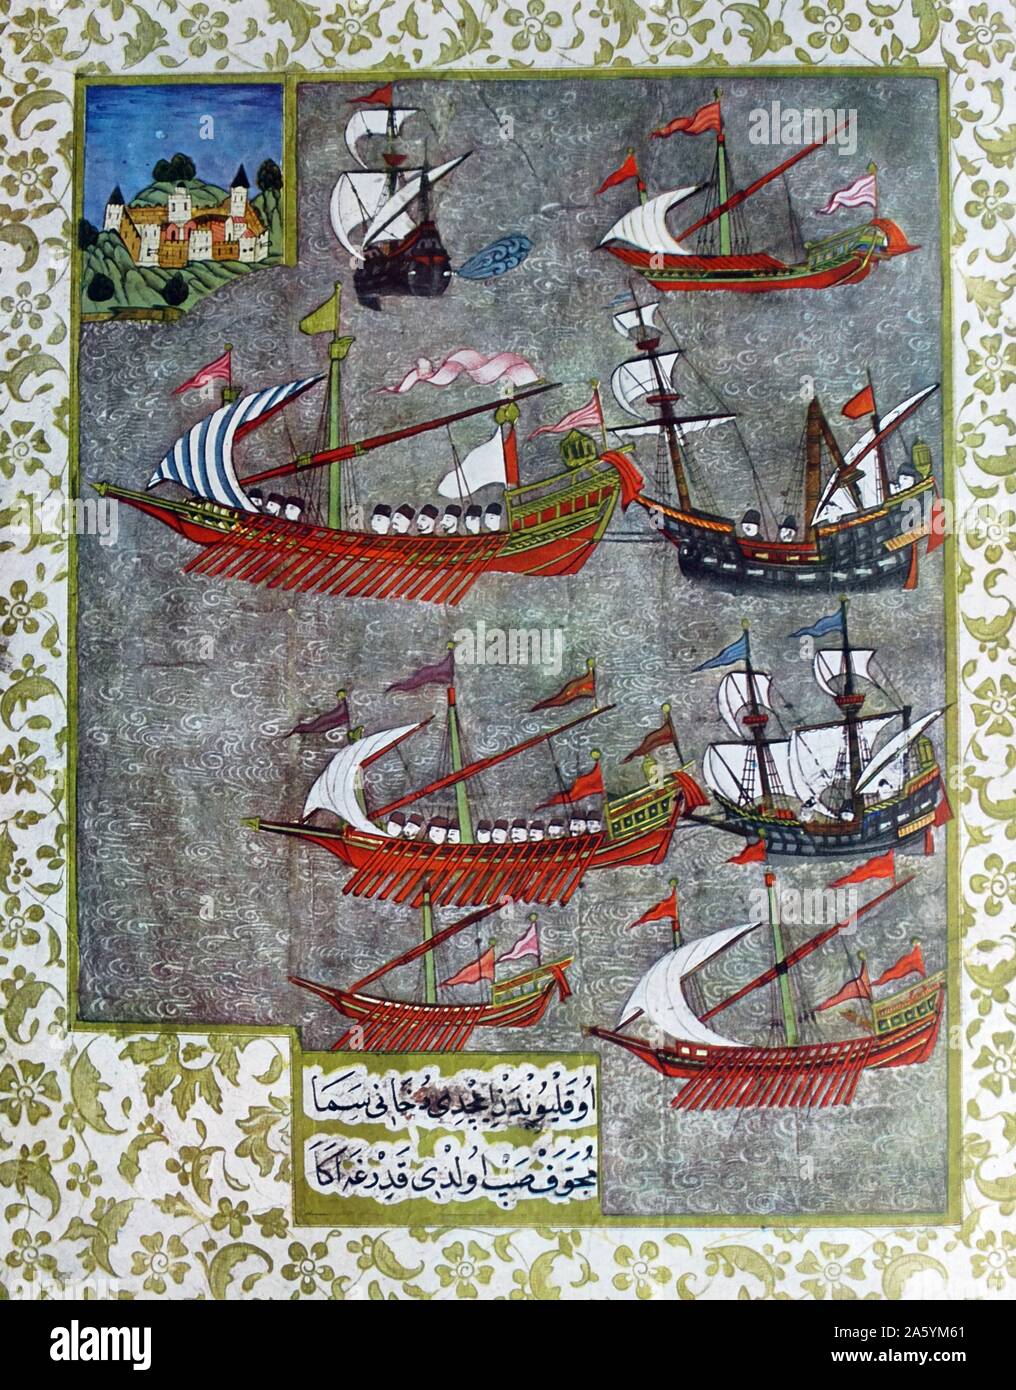 Early 17th Century Ottoman Illustration from Manuscript Hazine 1124, Sehname by Nadiri, 1620s, Captain Ali Pasha defeated 13 enemy ships with a Galleon Stock Photo